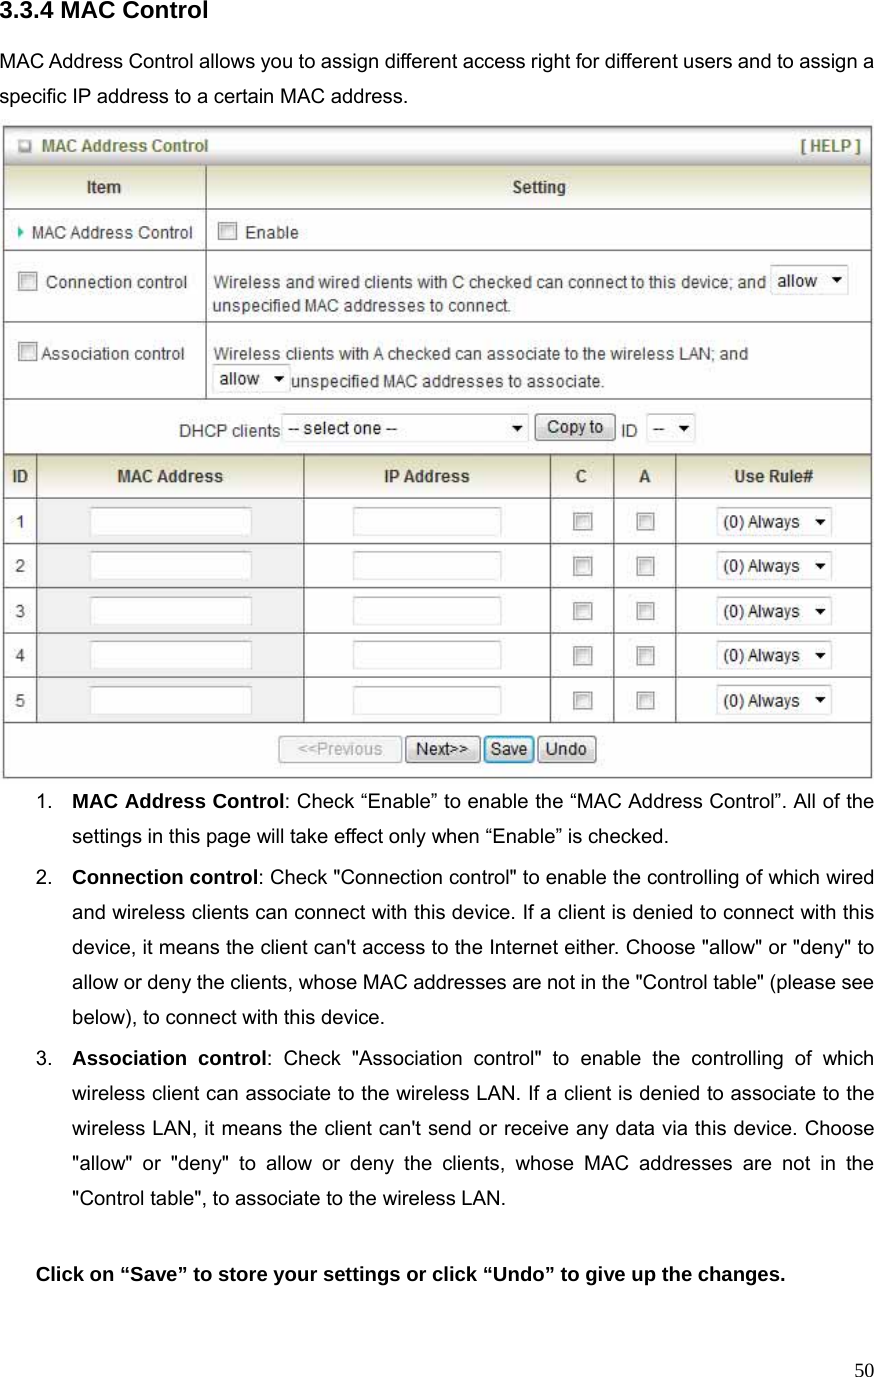  503.3.4 MAC Control  MAC Address Control allows you to assign different access right for different users and to assign a specific IP address to a certain MAC address.  1.  MAC Address Control: Check “Enable” to enable the “MAC Address Control”. All of the settings in this page will take effect only when “Enable” is checked. 2.  Connection control: Check &quot;Connection control&quot; to enable the controlling of which wired and wireless clients can connect with this device. If a client is denied to connect with this device, it means the client can&apos;t access to the Internet either. Choose &quot;allow&quot; or &quot;deny&quot; to allow or deny the clients, whose MAC addresses are not in the &quot;Control table&quot; (please see below), to connect with this device. 3.  Association control: Check &quot;Association control&quot; to enable the controlling of which wireless client can associate to the wireless LAN. If a client is denied to associate to the wireless LAN, it means the client can&apos;t send or receive any data via this device. Choose &quot;allow&quot; or &quot;deny&quot; to allow or deny the clients, whose MAC addresses are not in the &quot;Control table&quot;, to associate to the wireless LAN.  Click on “Save” to store your settings or click “Undo” to give up the changes.  